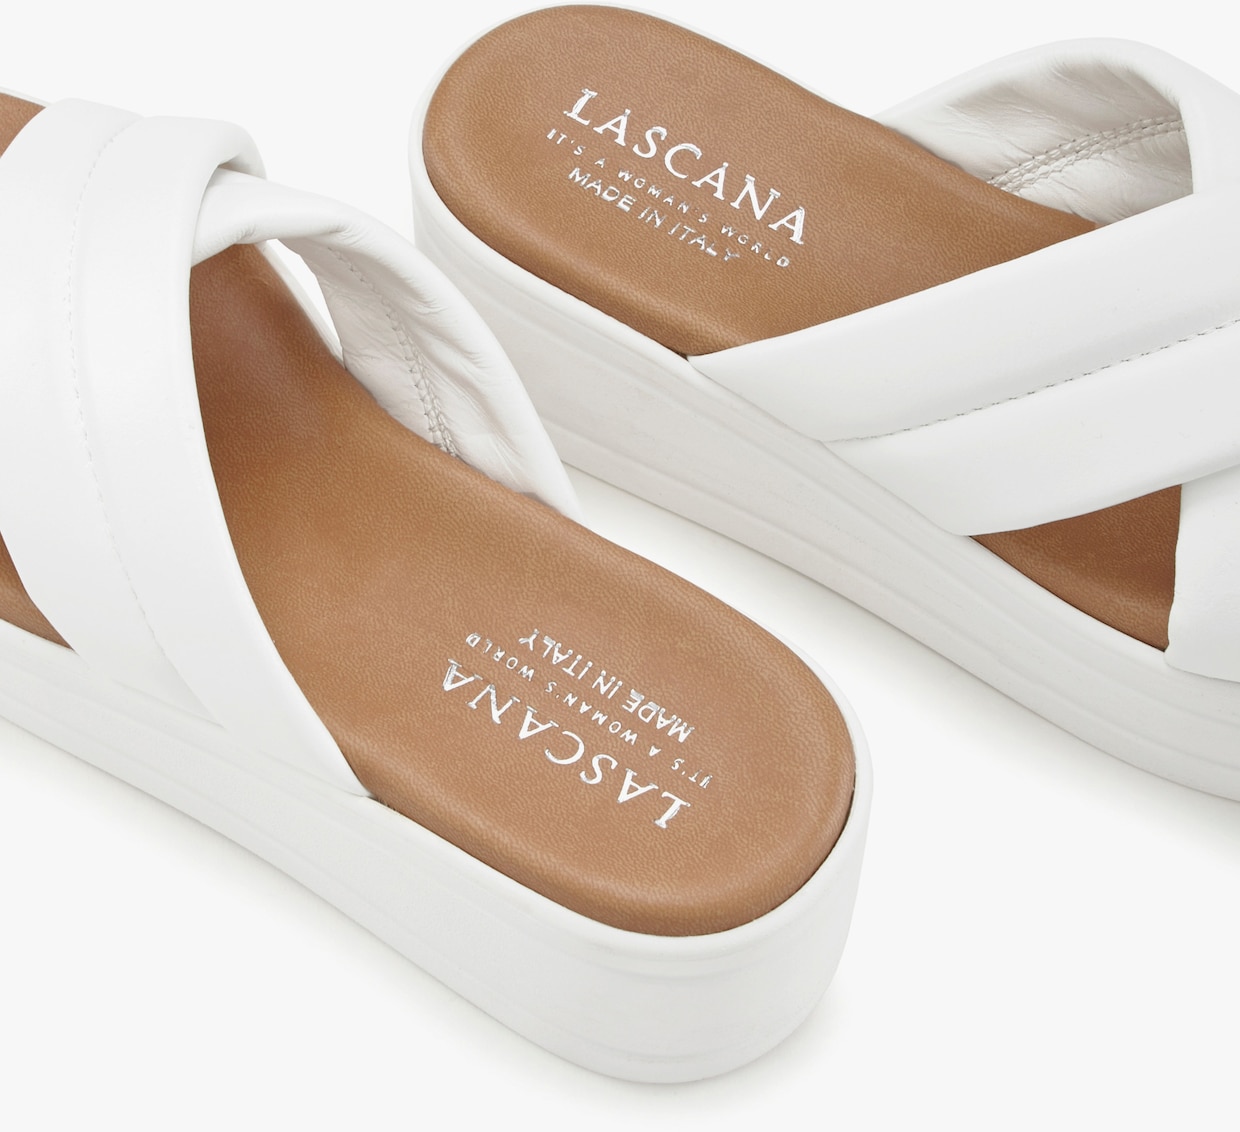 LASCANA Slippers - wit